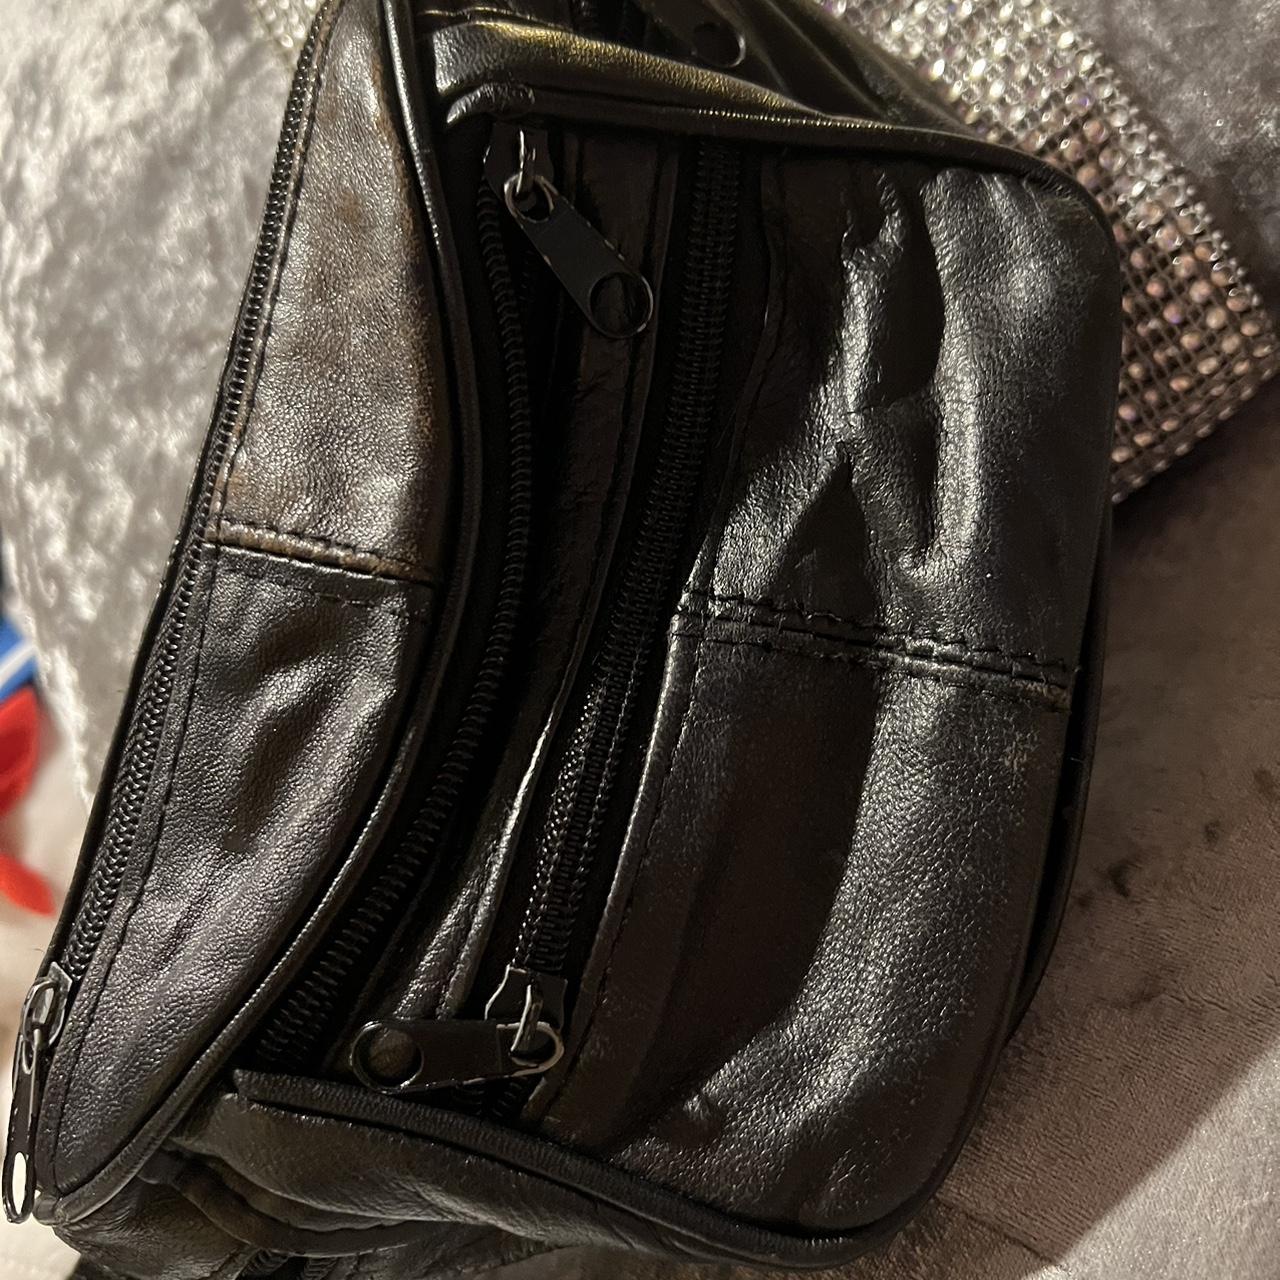 Black Leather Bum Bag Over 6 Compartments, Brand... - Depop